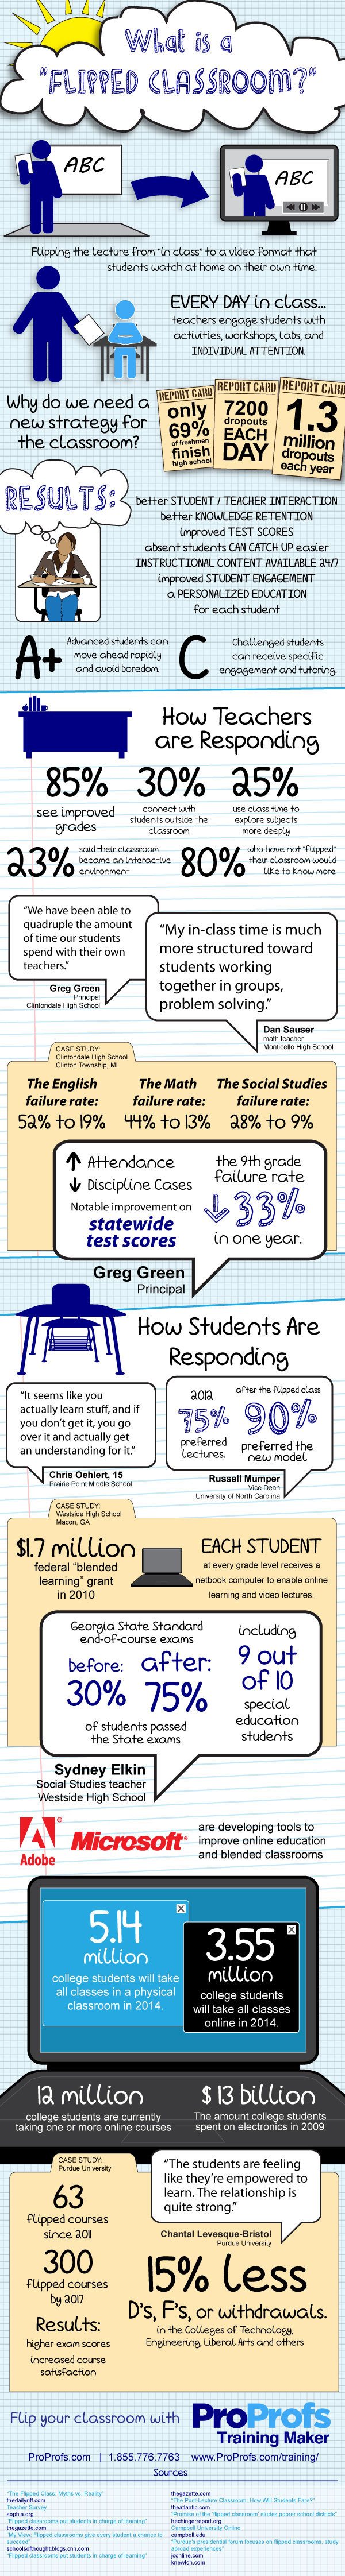 What is a Flipped Classroom Infographic Plus The Educator Guide to Flipped Classroom